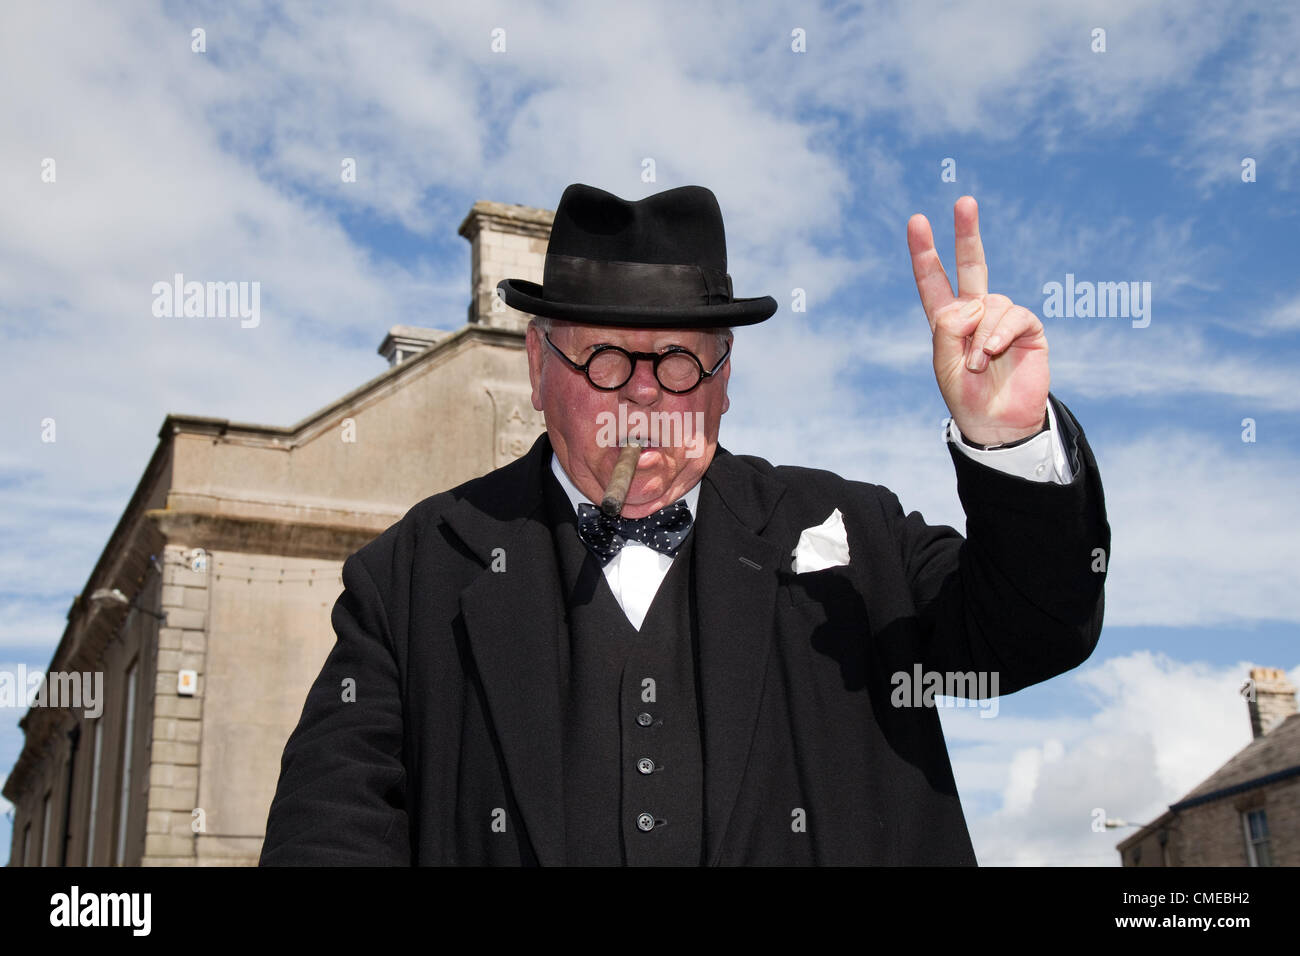 Peter Austwick, (MR) look-alike, double, or doppelgänger from Peterborough,  a 1940s Churchill lookalike, V-sign, V-for-Victory sign with two fingers, actor, people, event, man, veteran, city, male, performance, show, army, history, military, soldier, uniform, vintage, war, historical, ii, perform, person, re-enactment, building at the market place Leyburn   One of the biggest events in Leyburn's calender the 1940s World War II, Wartime Re-enactment Weekend, a summer event on July 28th & 29th 2012, Wensleydale,  North Yorkshire Dales, Richmondshire, UK Stock Photo